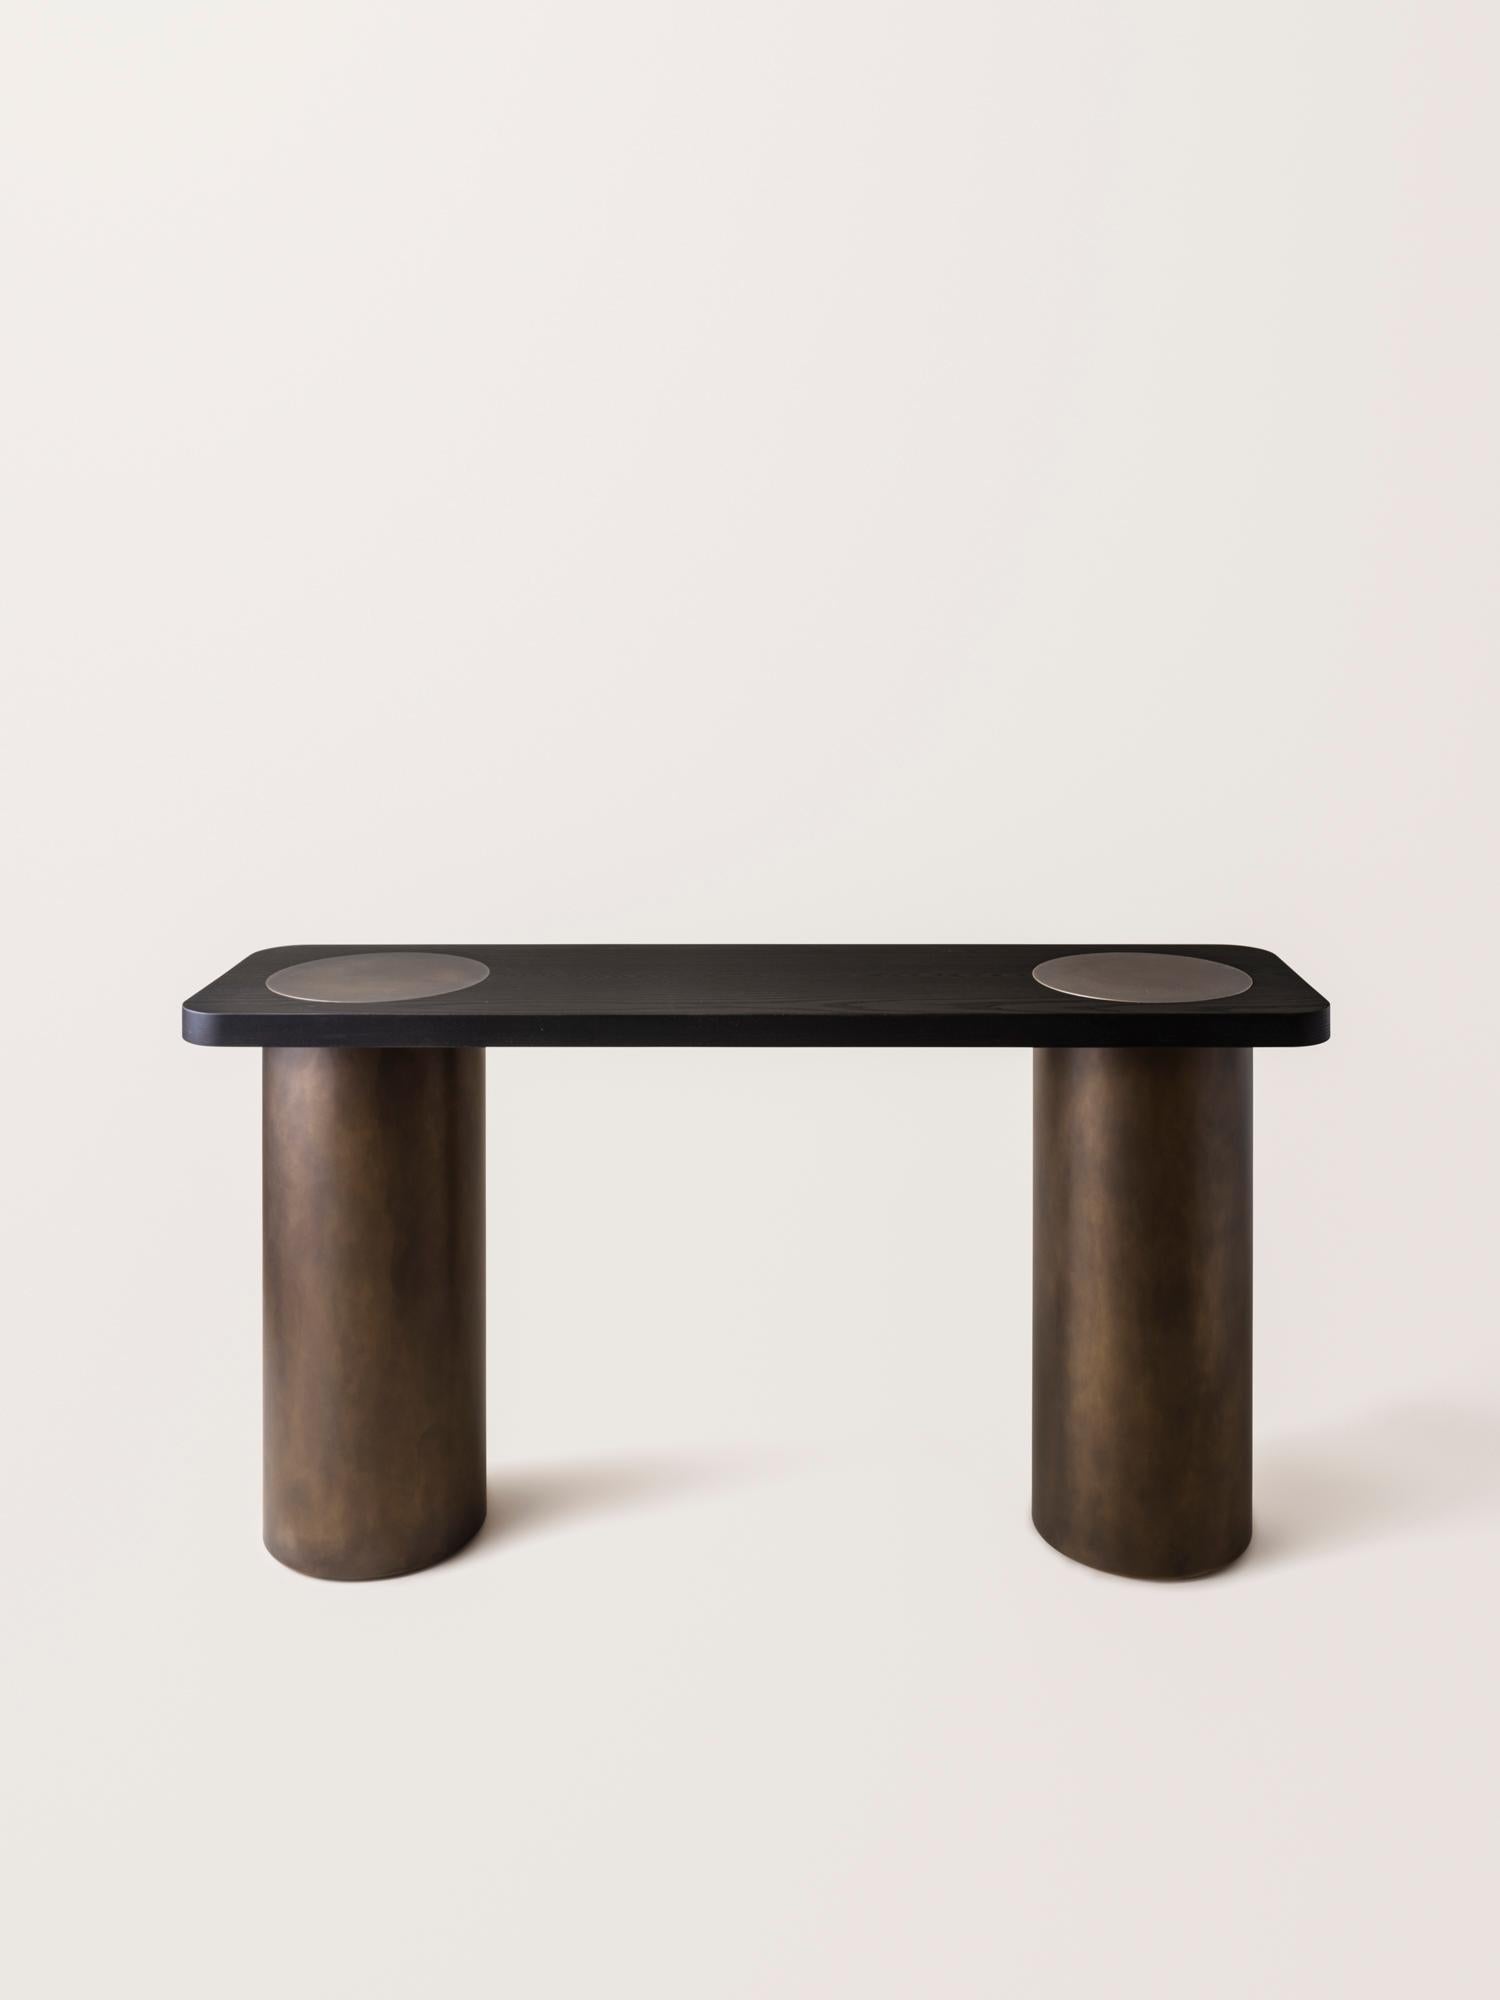 Silo Console Table - Blackened Ash and Oil-Rubbed Bronze (with Domes) In New Condition For Sale In New York, NY